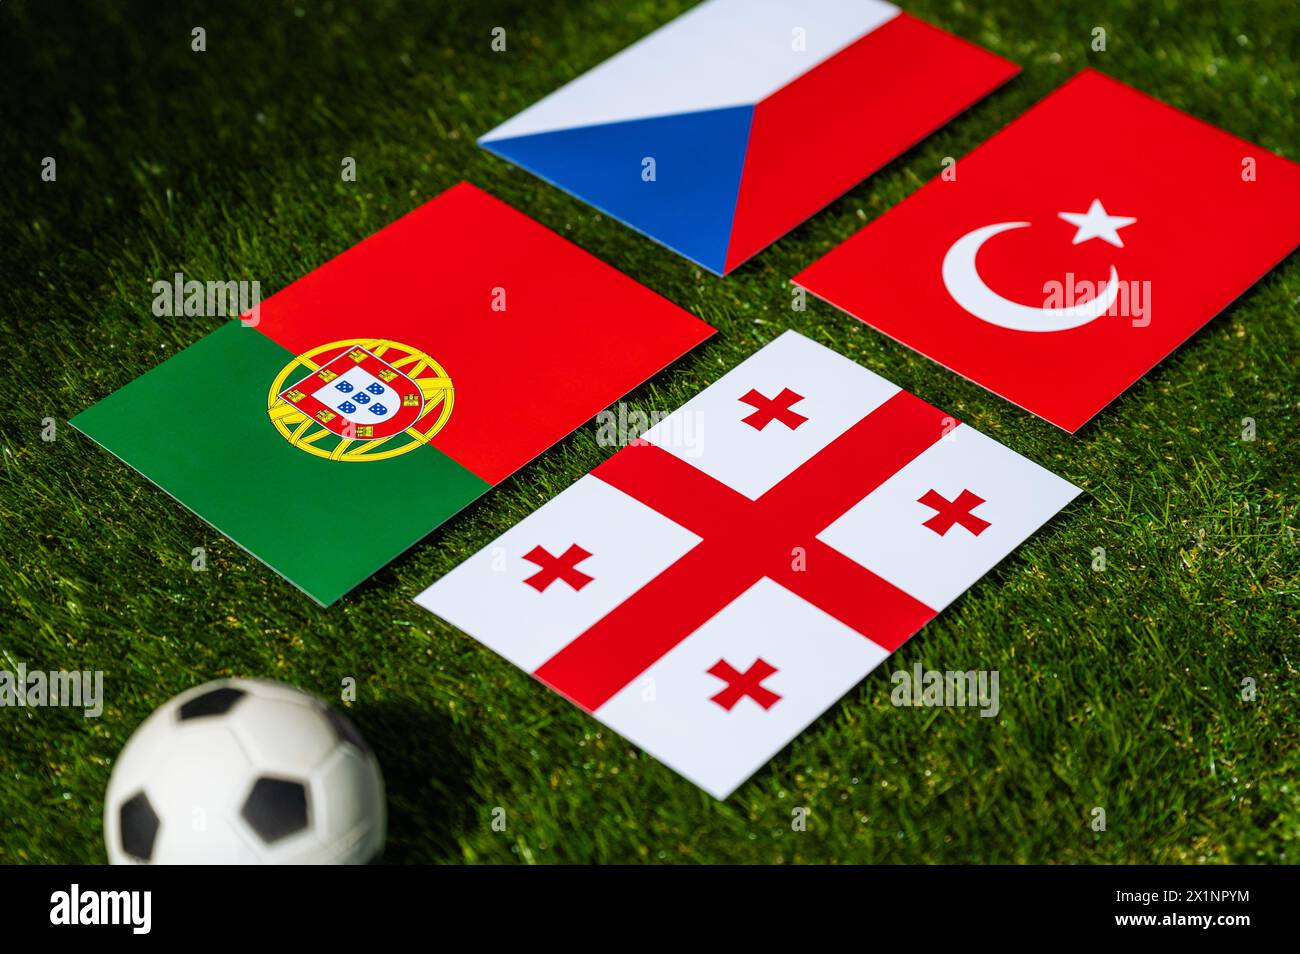 Football Tournament in Germany 2024: Group F and national flags of Turkey, Georgia, Portugal, Czech Republic and soccer ball on green grass Stock Photo